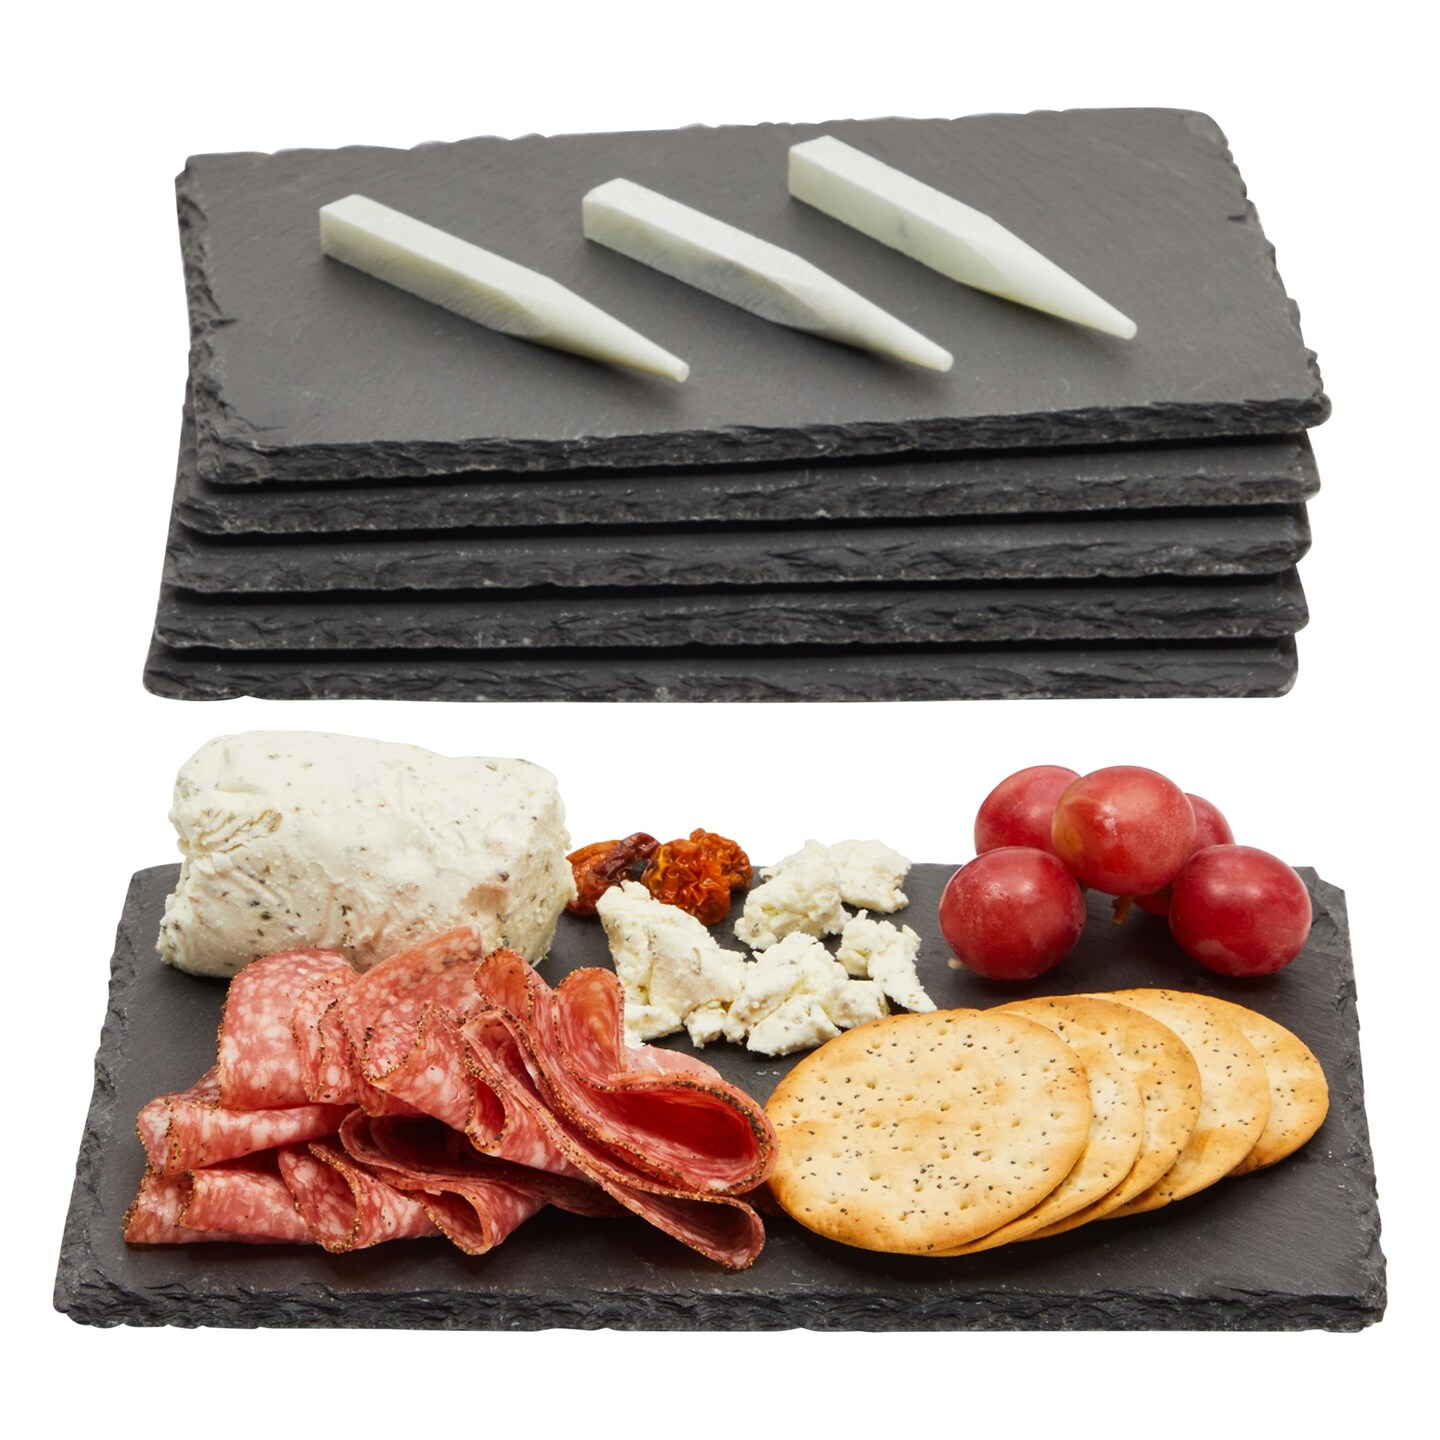 6-Piece Mini Charcuterie Boards with Chalk, Individual Stone Plates for Cheese, Meat, Appetizers, Sushi Plate for Brunch, Dinner, and Reception Meals (6 x 9 Inches)